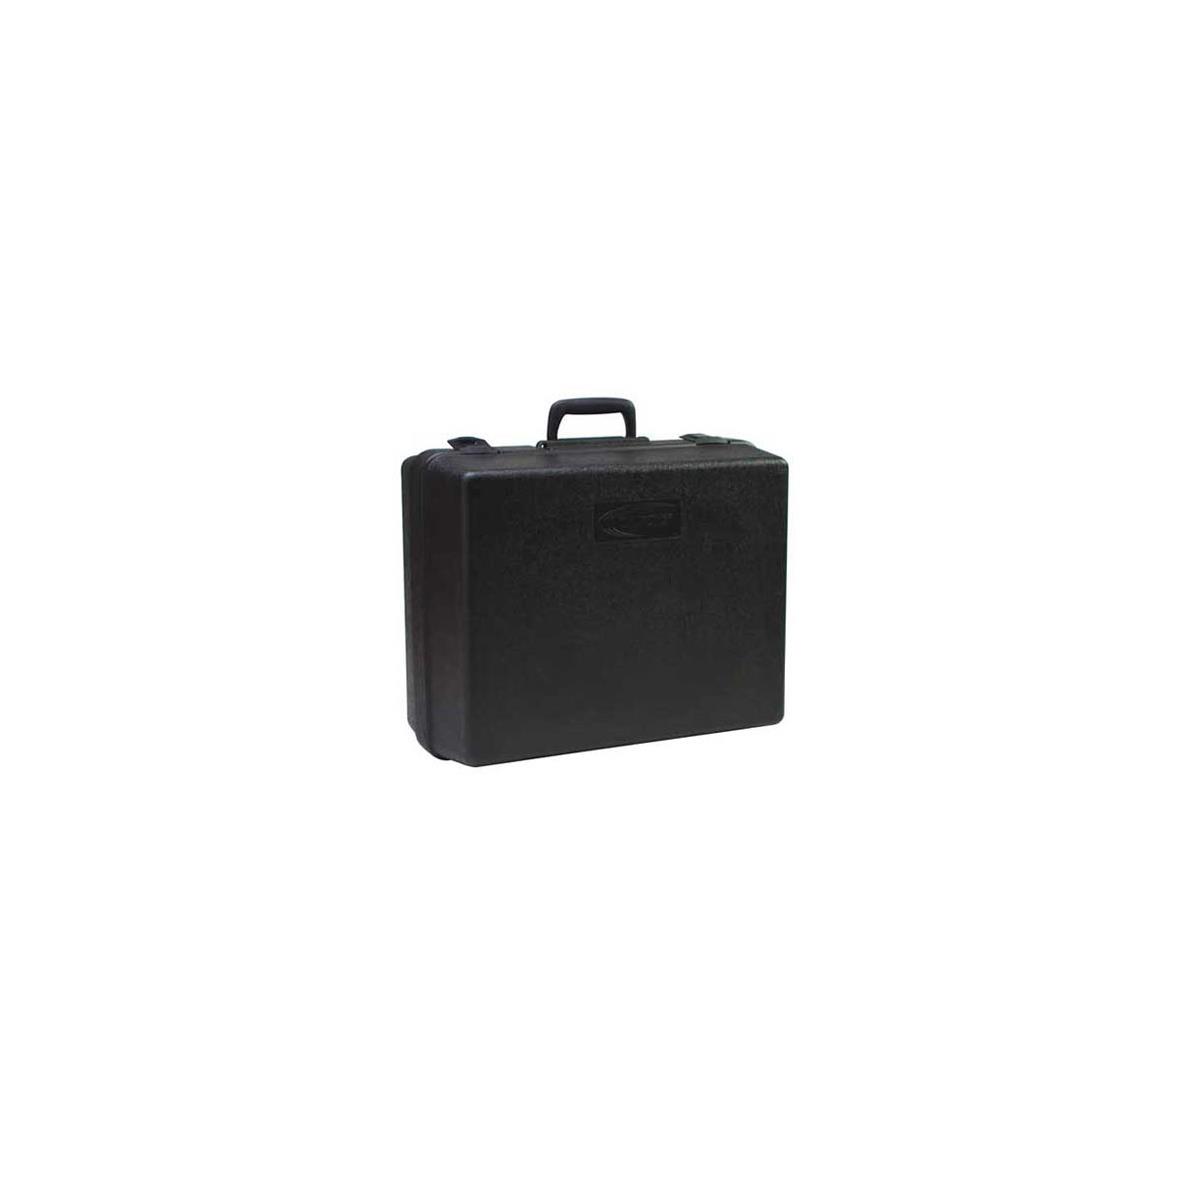 Image of Califone 2005 Media Player Storage/Carry Case for Califone 1776PLC